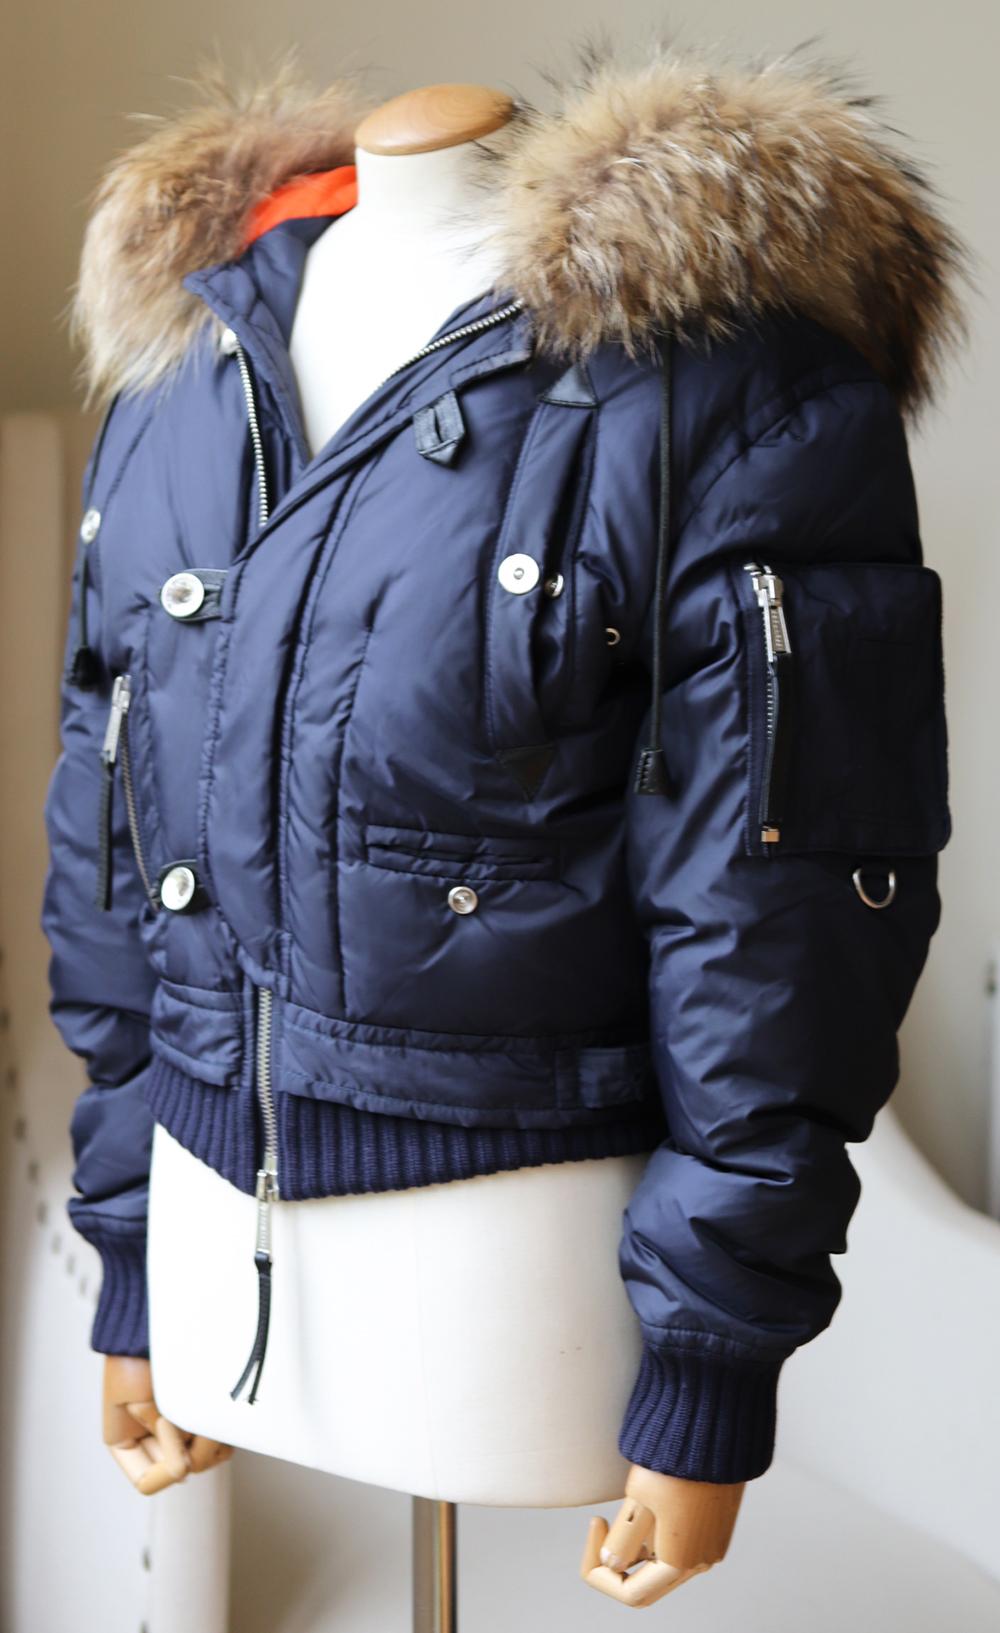 Cut from down, this jacket has a raccoon-fur trim hood and is lightly padded with down to fit a bomber jacket style.
There are discreet ribbed knit thick hems and cuffs for a warm fit.
Navy down, beige and brown fur (Raccoon).
Zip and button